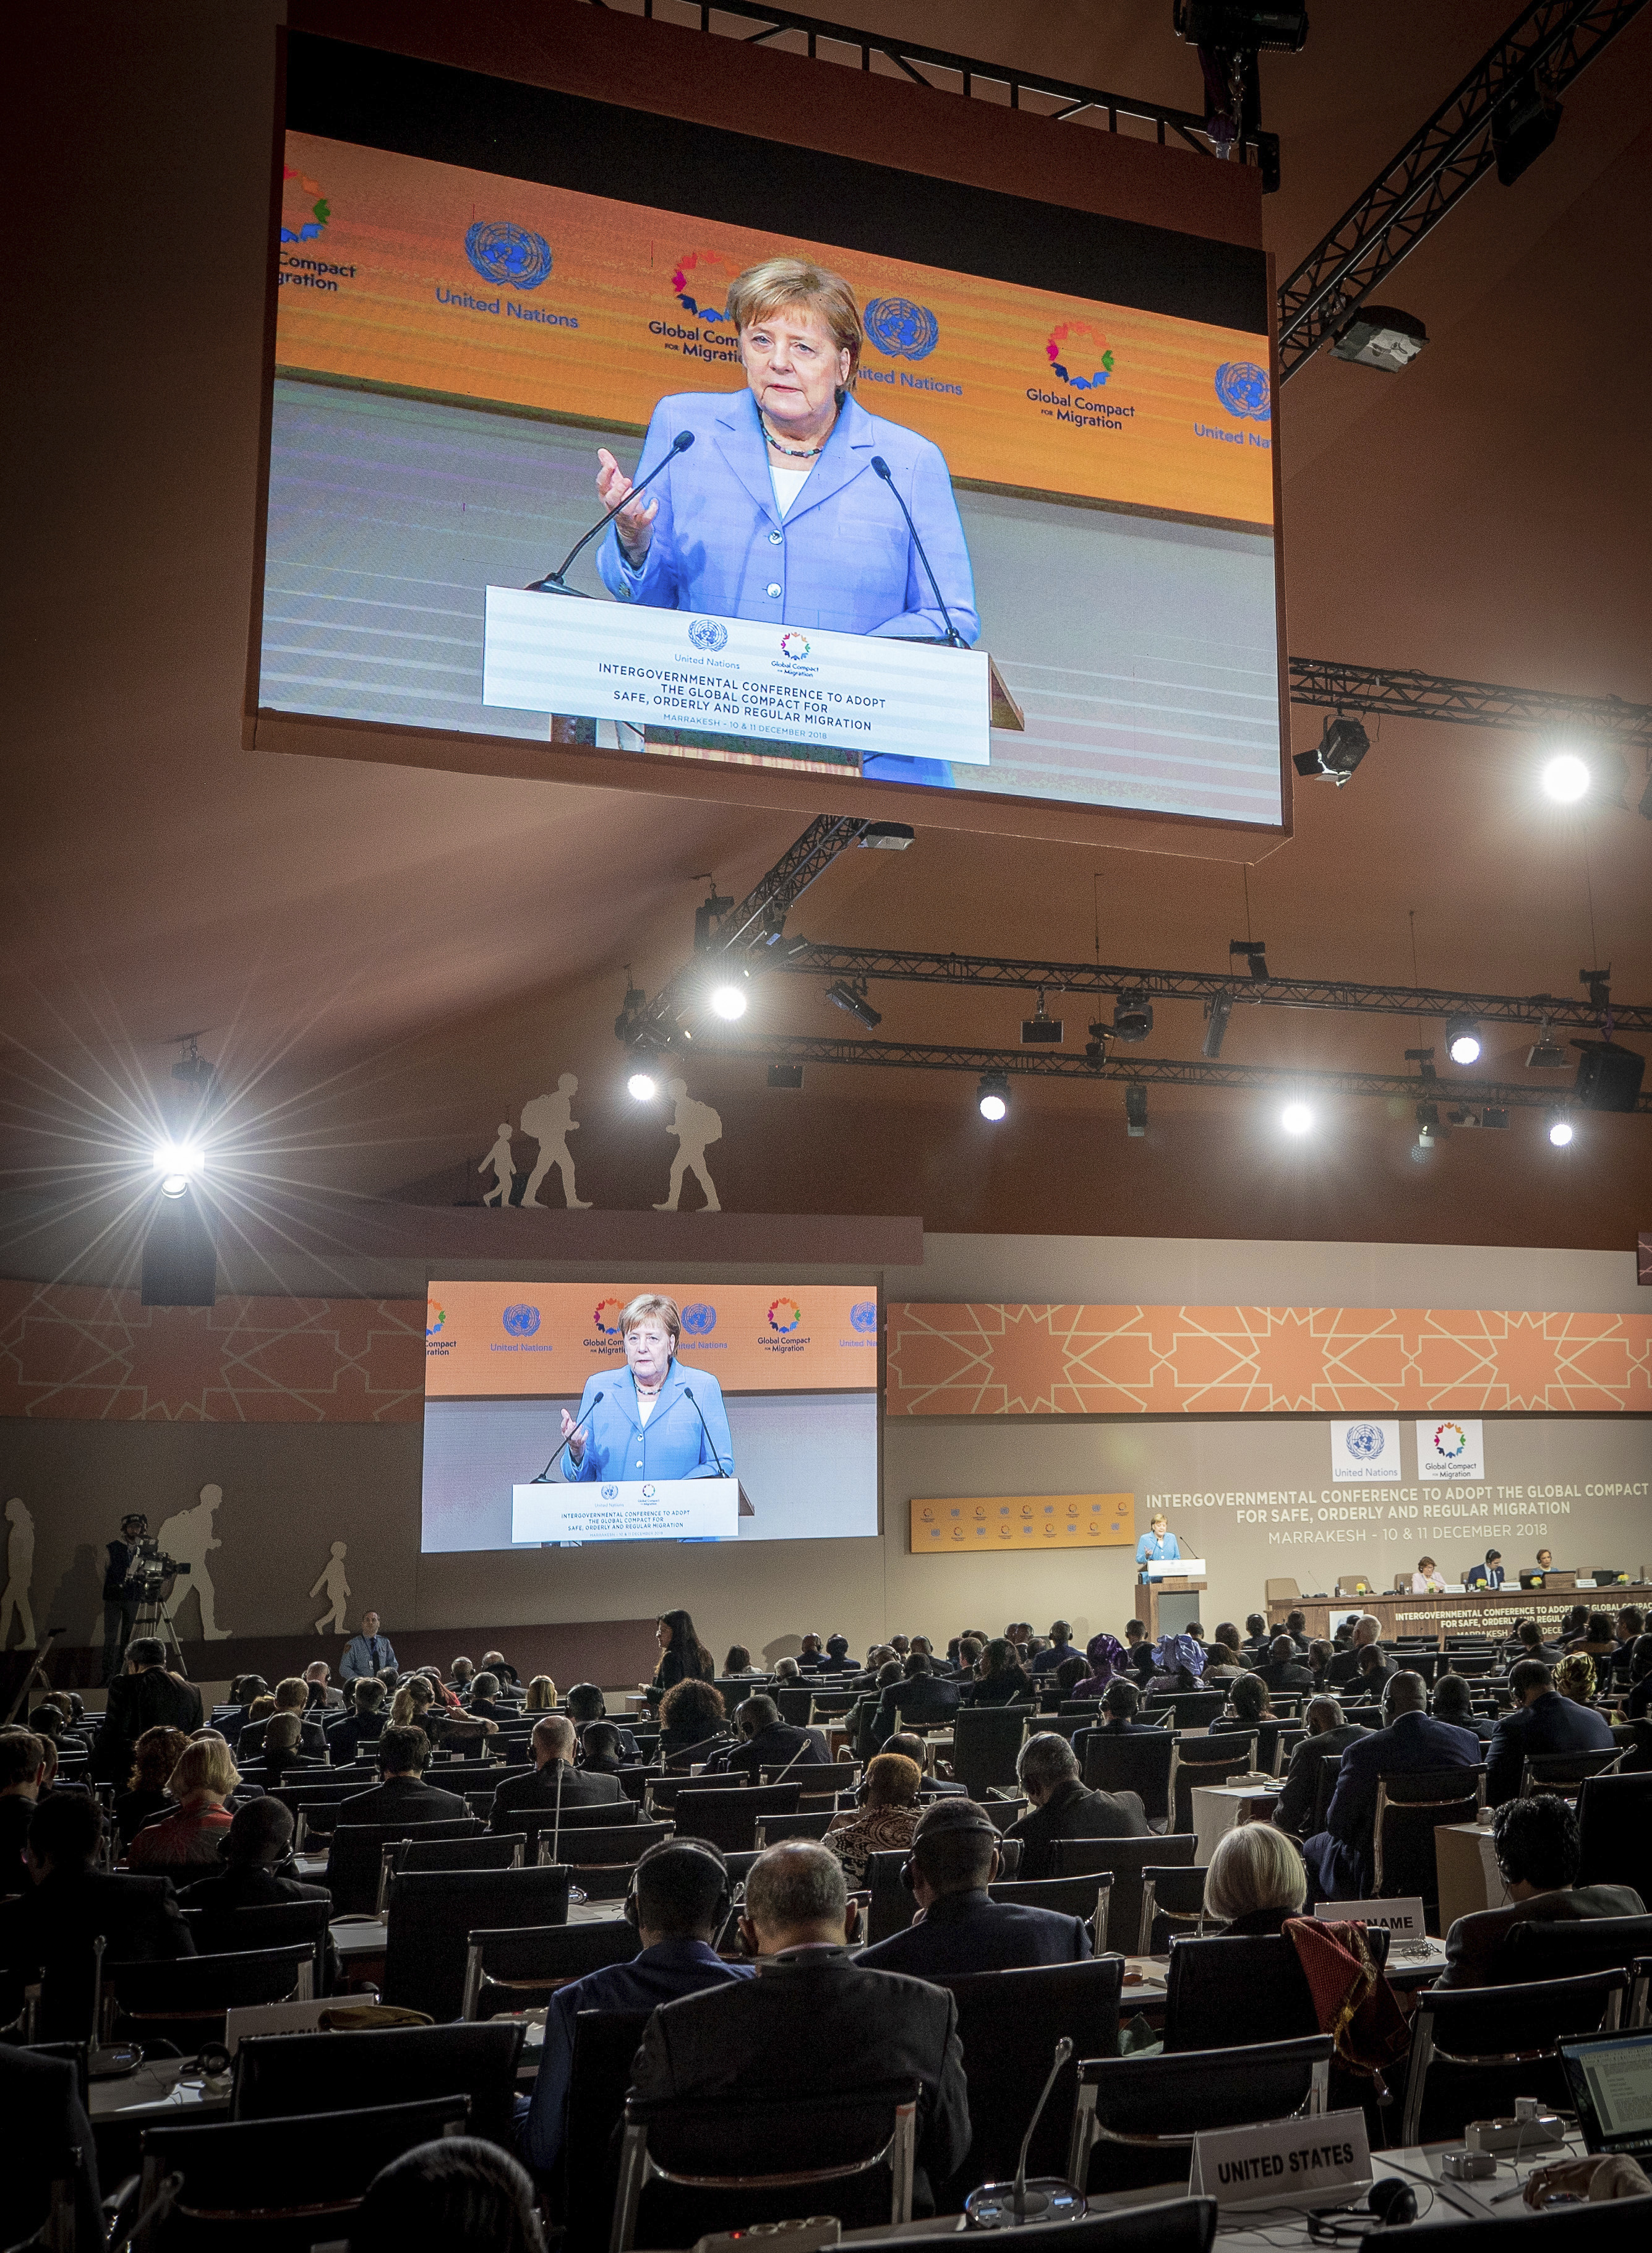 10 December 2018, Morocco, Marrakesch: Chancellor Angela Merkel (CDU) speaks at the UN Conference on the Migration Pact. Chancellor Angela Merkel (CDU) has praised the UN Migration Pact as a milestone in international migration policy. Photo by: Michael Kappeler/picture-alliance/dpa/AP Images